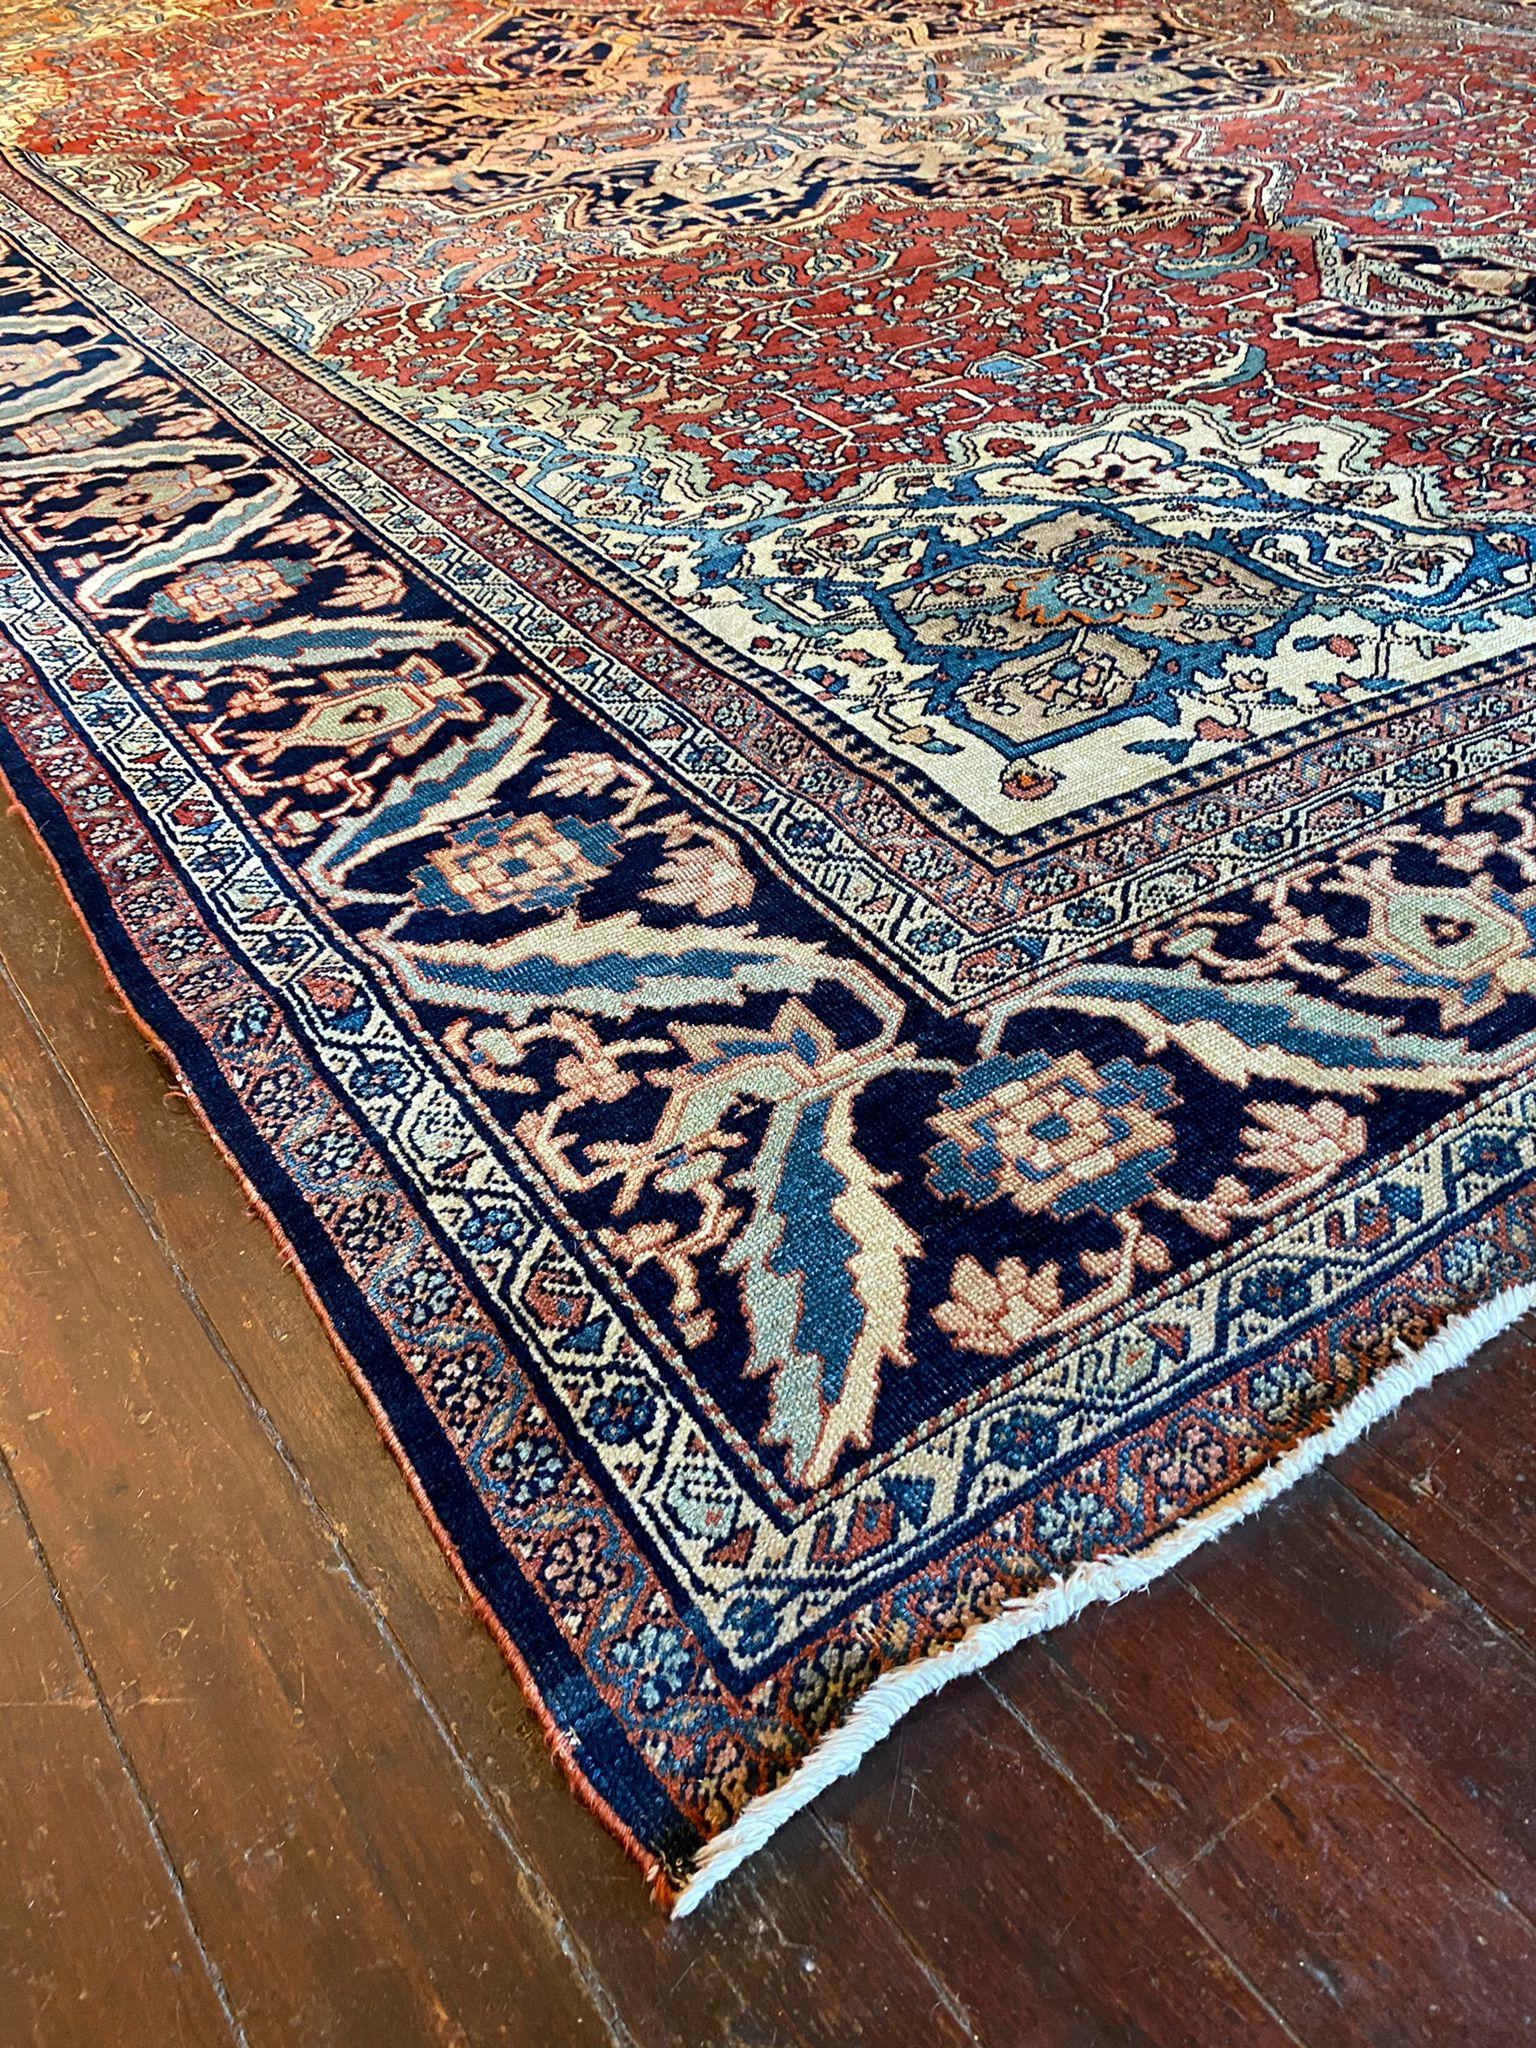 The dominant color in this Vintage S Farahan Rug is a deep, rich navy blue. This deep blue serves as the backdrop for the rug's intricate patterns and motifs, lending a sense of regality and sophistication to the overall design. It creates a